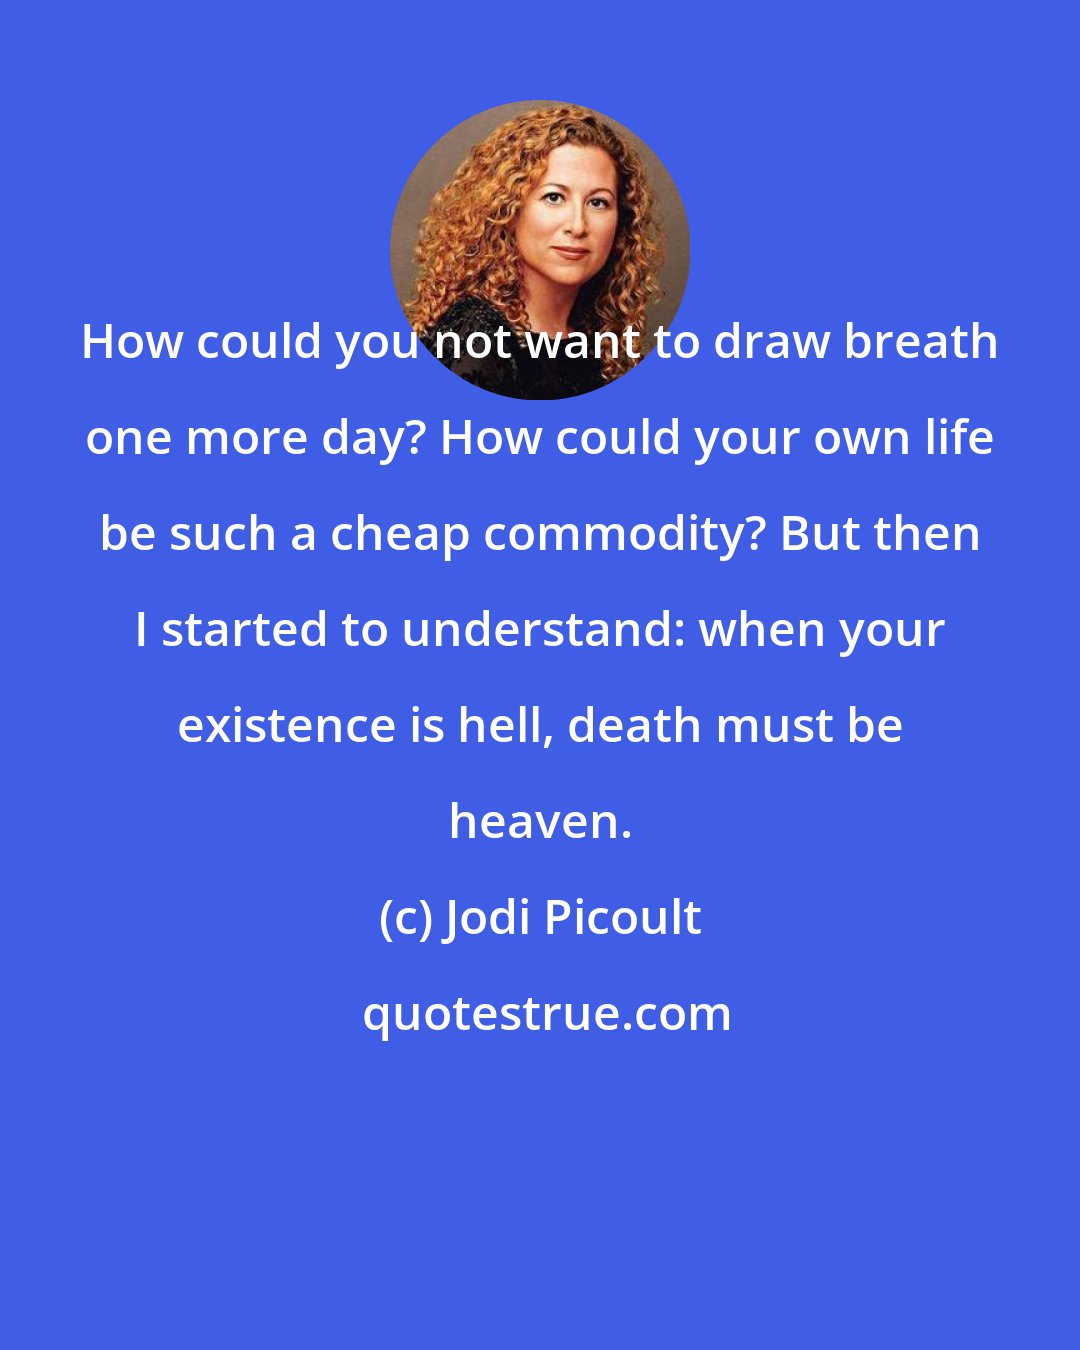 Jodi Picoult: How could you not want to draw breath one more day? How could your own life be such a cheap commodity? But then I started to understand: when your existence is hell, death must be heaven.